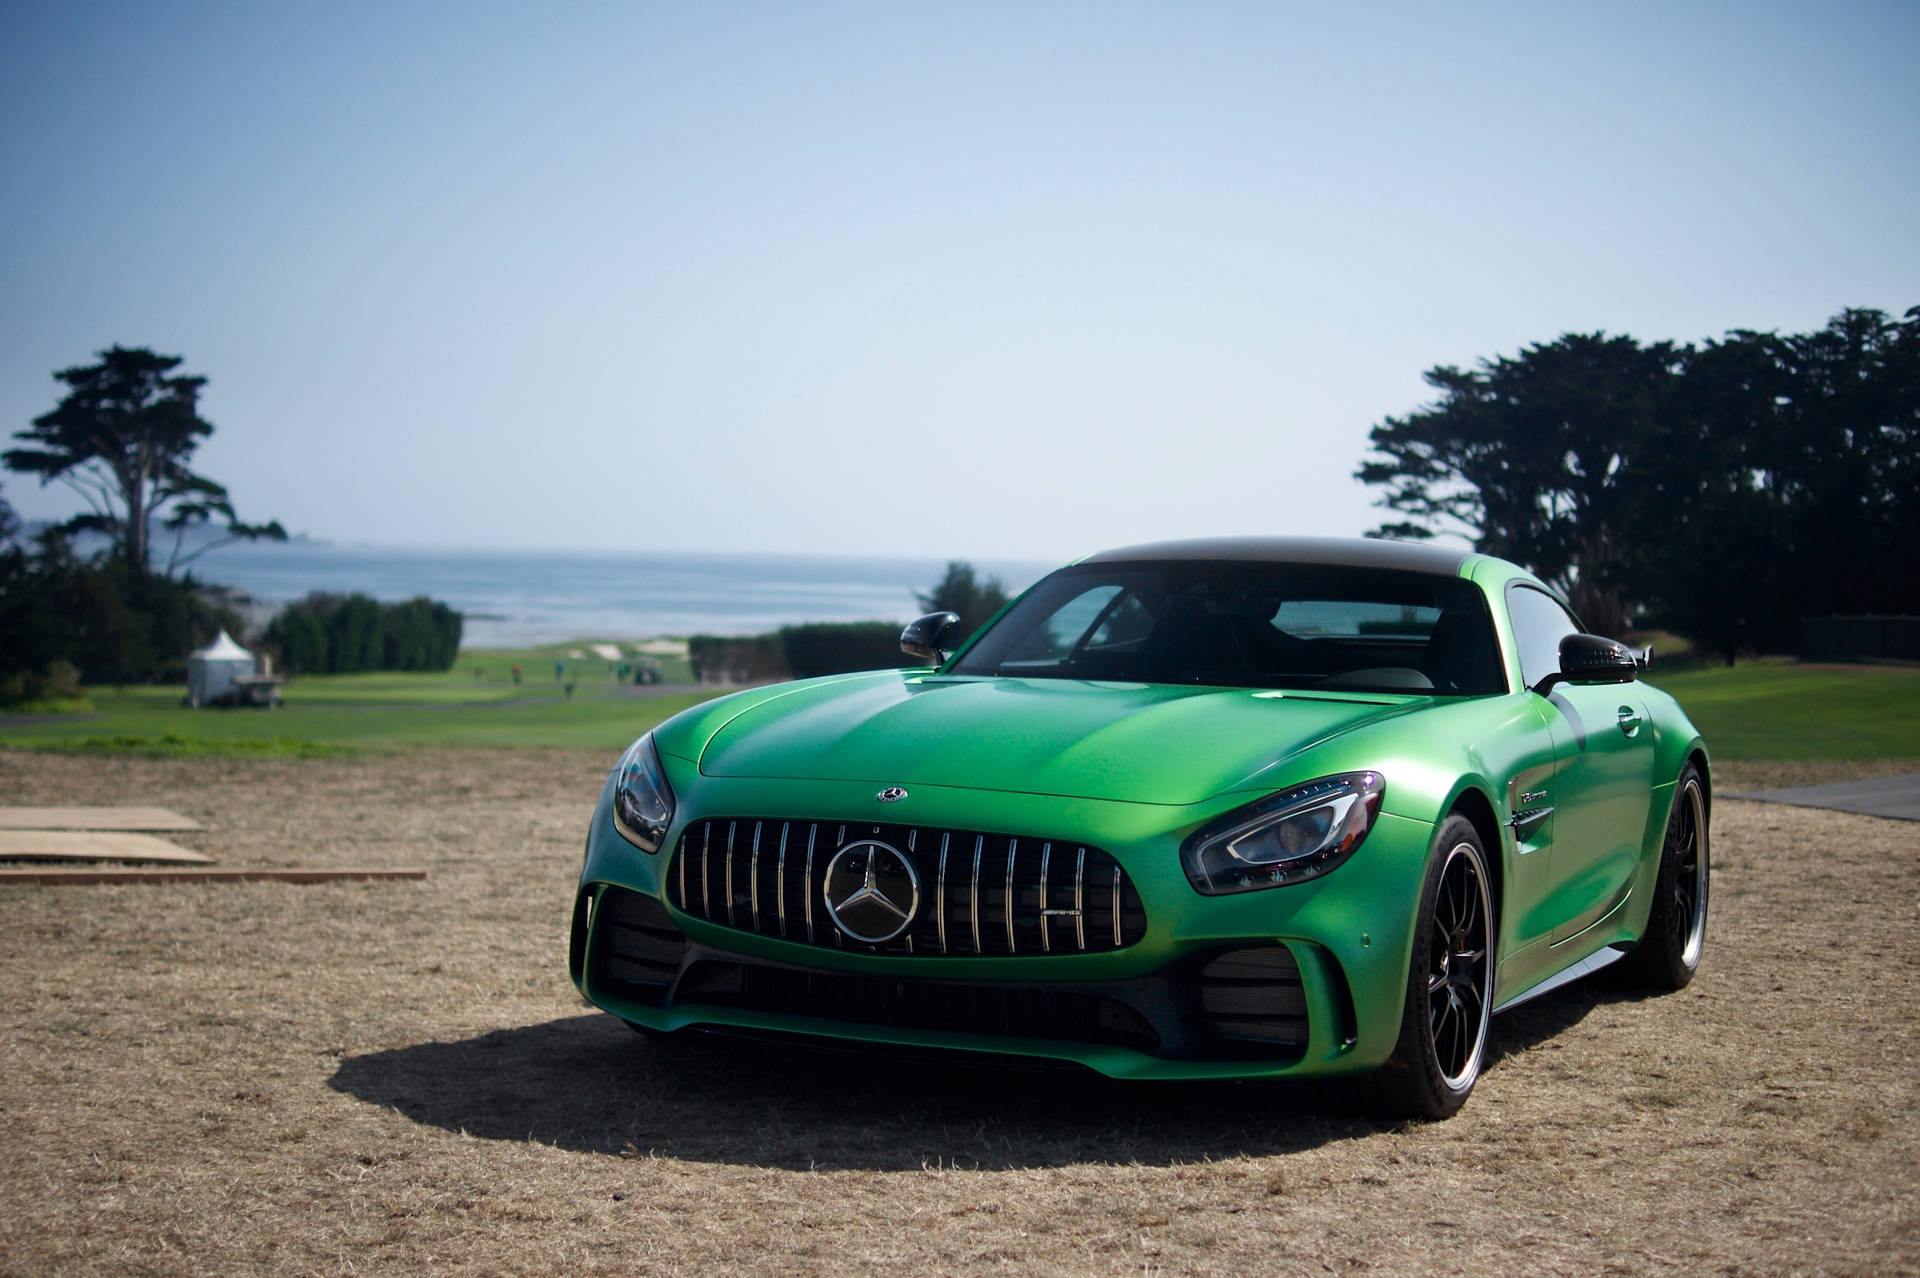 Amg Gtr Classic Green Background